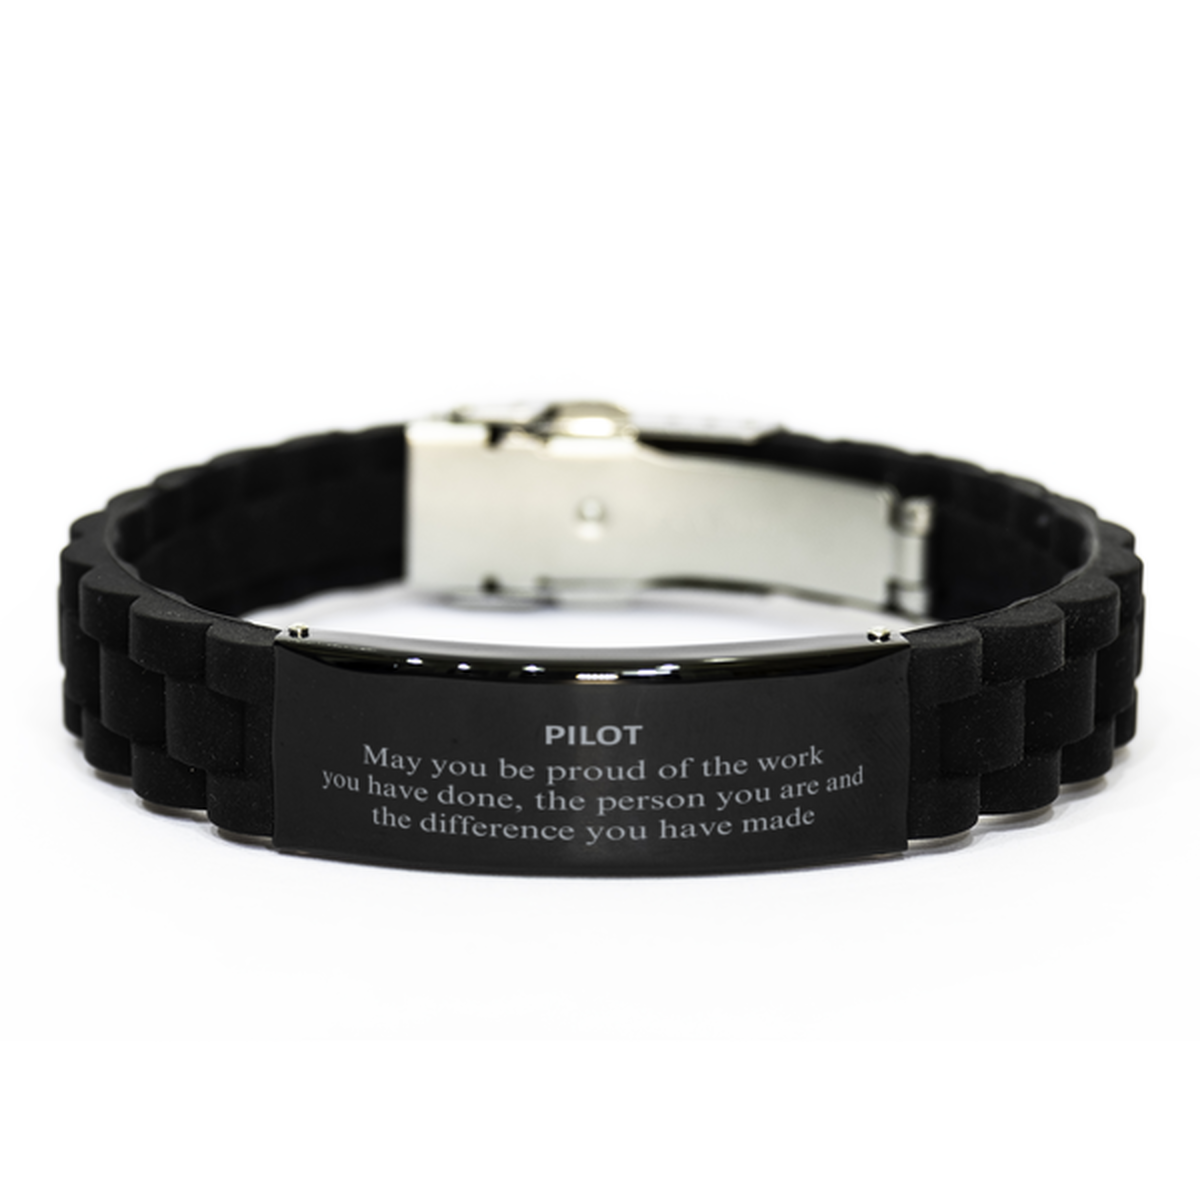 Pilot May you be proud of the work you have done, Retirement Pilot Black Glidelock Clasp Bracelet for Colleague Appreciation Gifts Amazing for Pilot